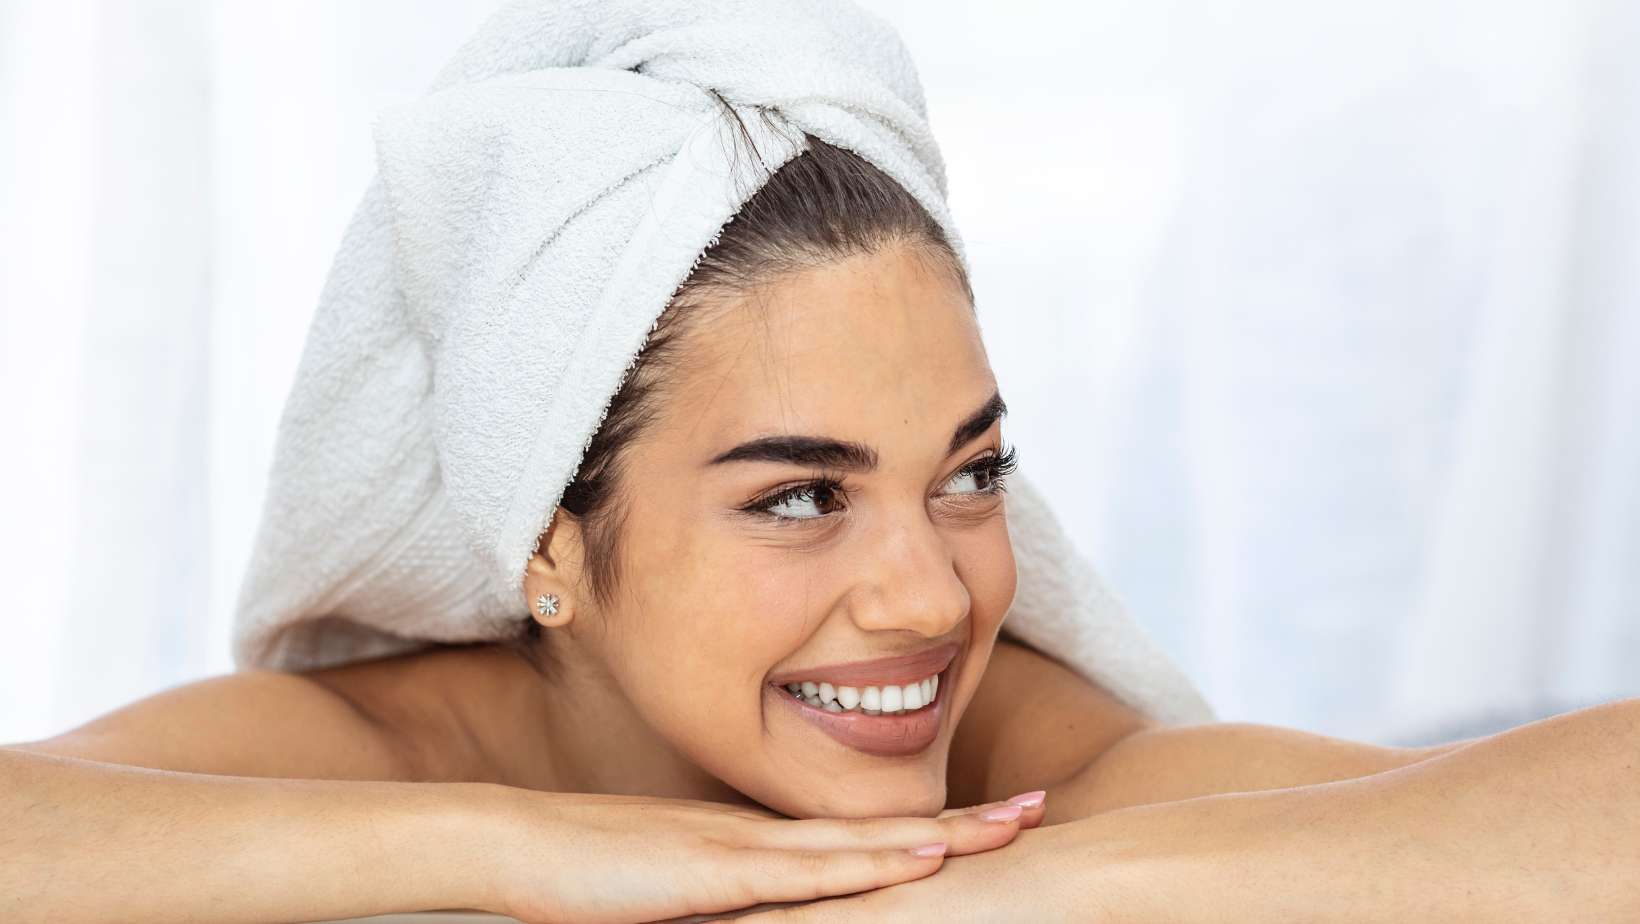 Revitalize or Rejuvenate? Comparing Microdermabrasion and Chemical Peels